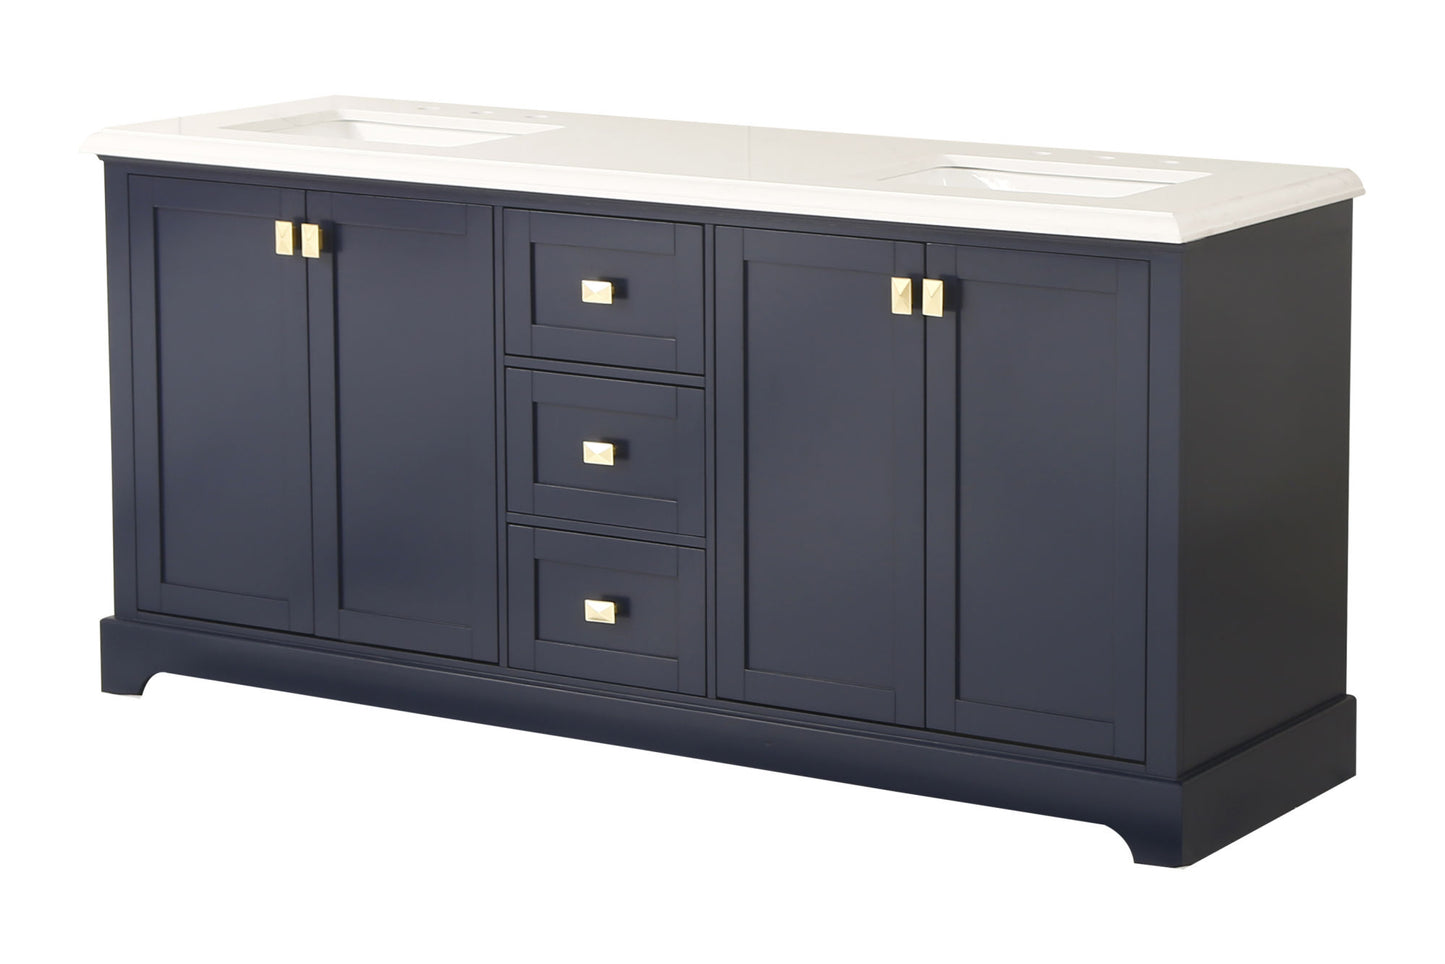 Vanity Sink Combo featuring a Marble Countertop, Bathroom Sink Cabinet, and Home Decor Bathroom Vanities - Fully Assembled Blue 72-inch Vanity with Sink 23V02-72NB